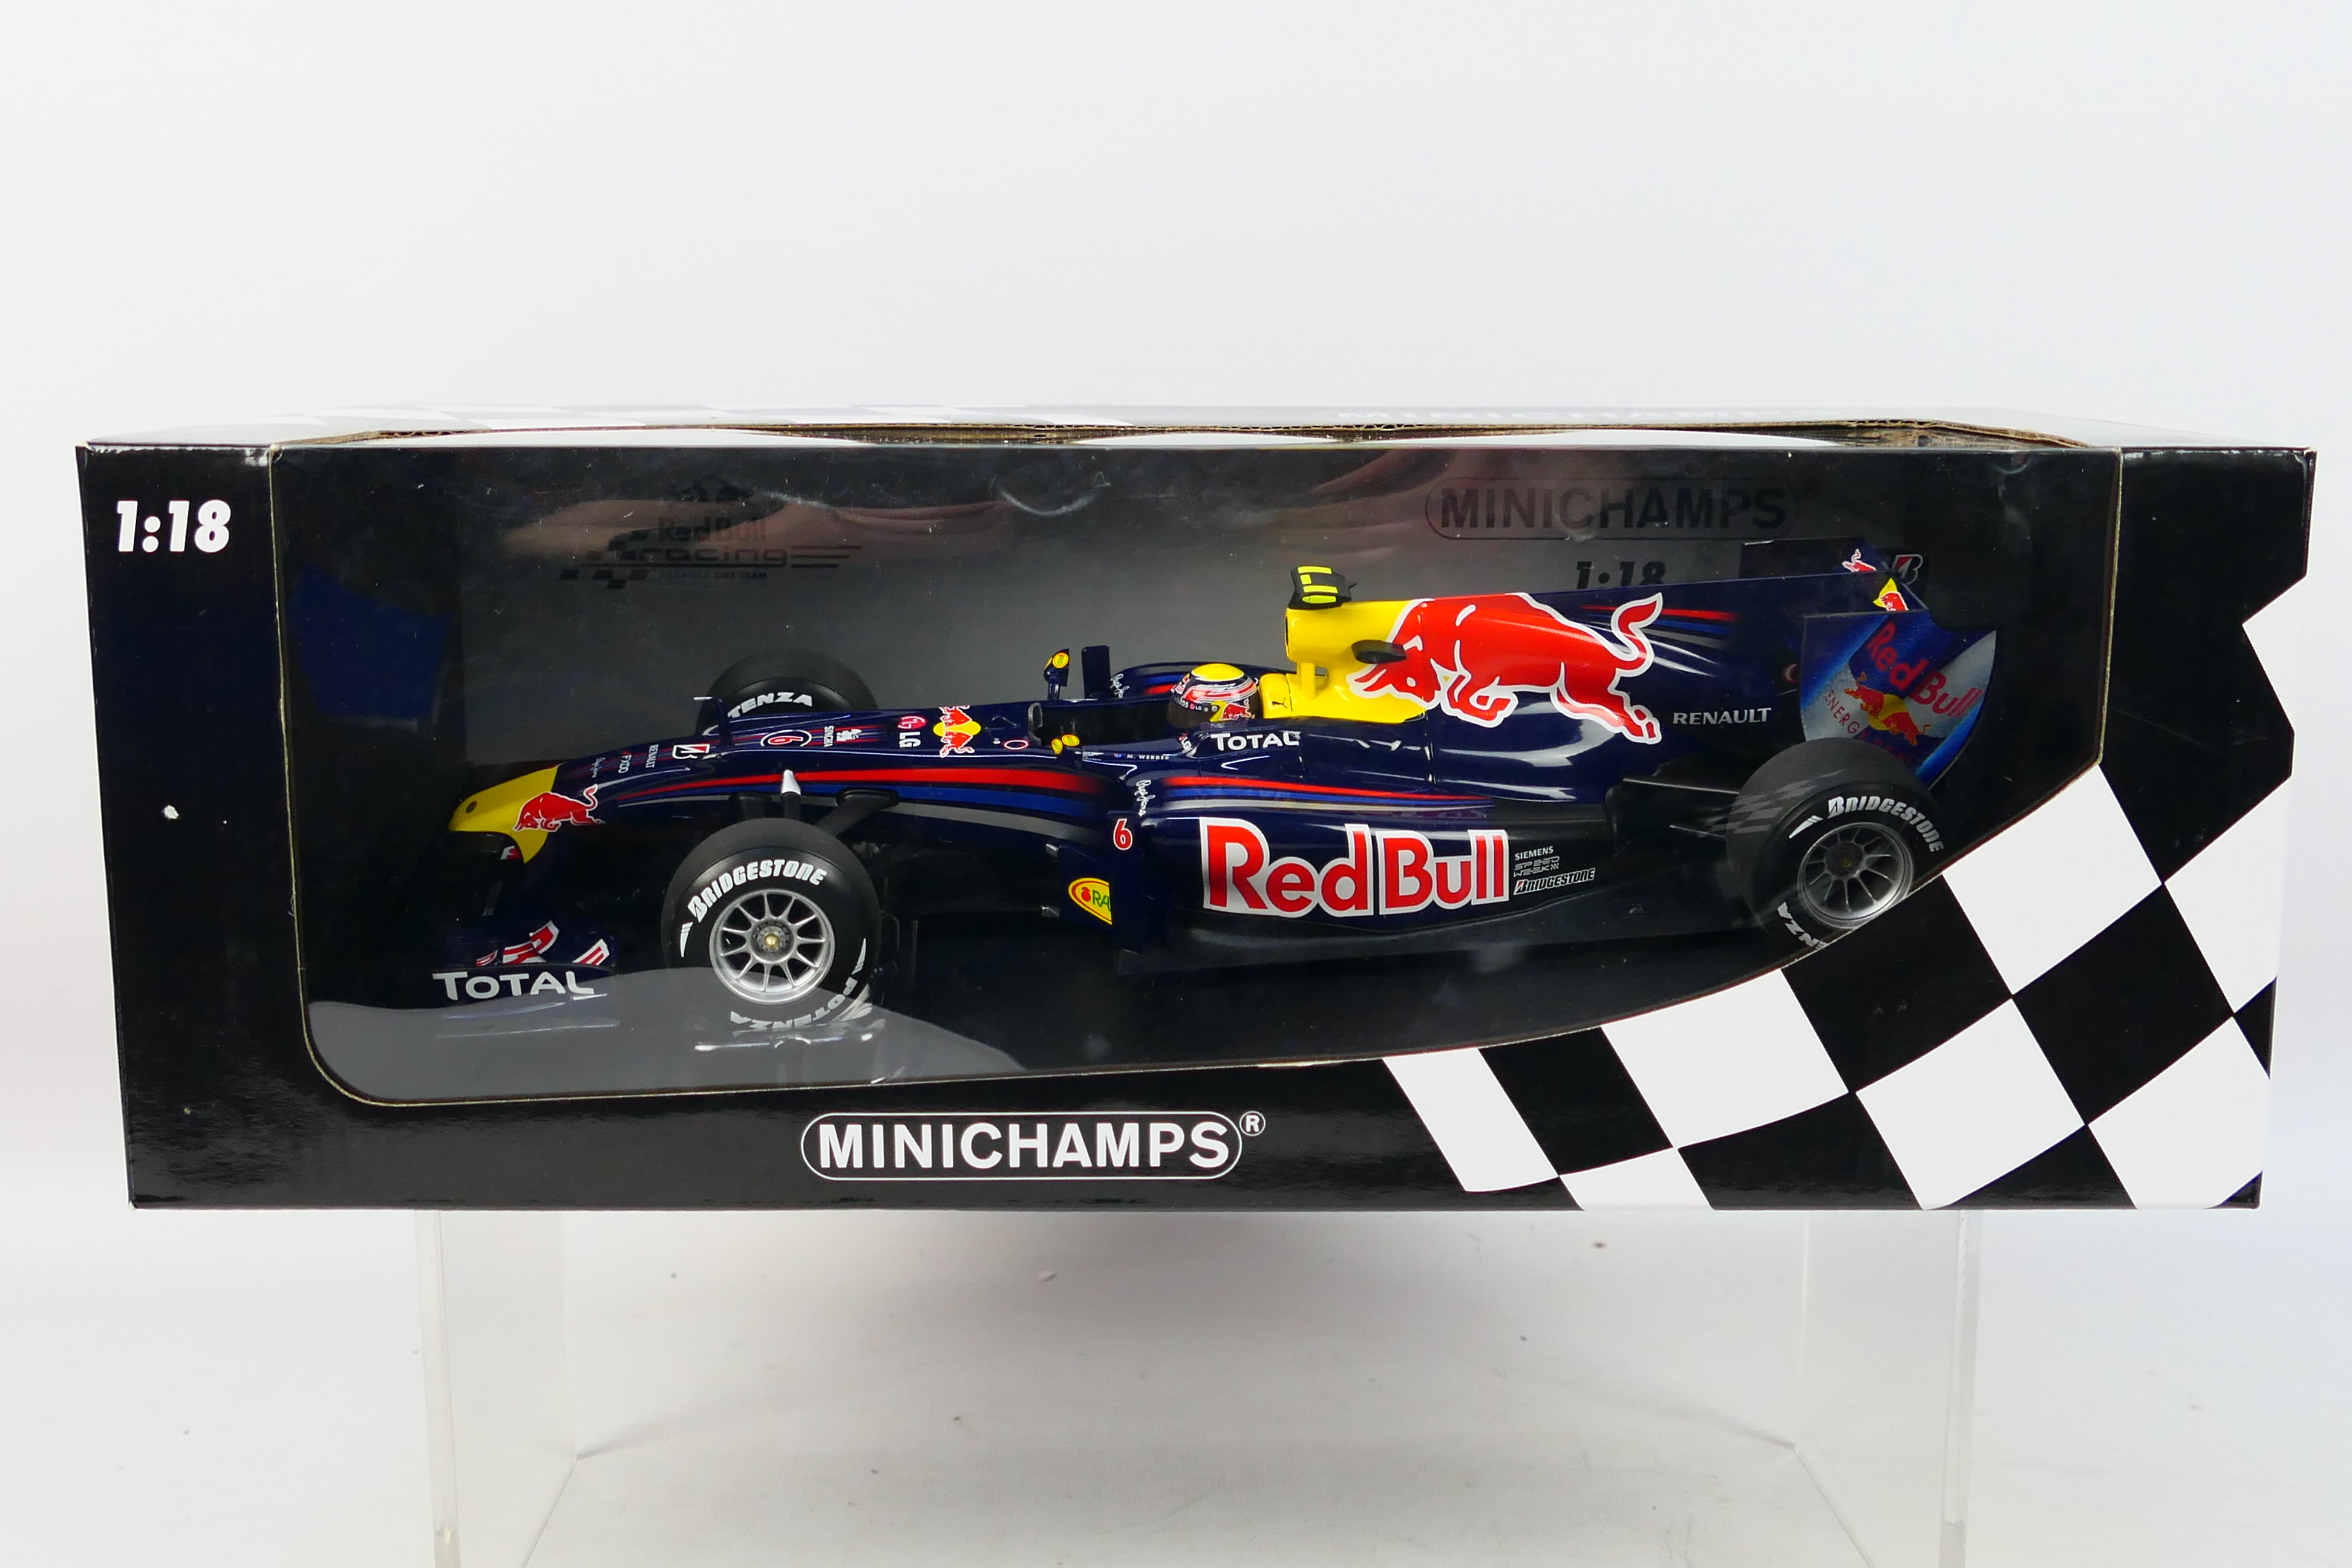 Minichamps - A boxed 1:18 scale Red Bull Racing Renault RB6 Mark Webber 2010 car # 110100006.